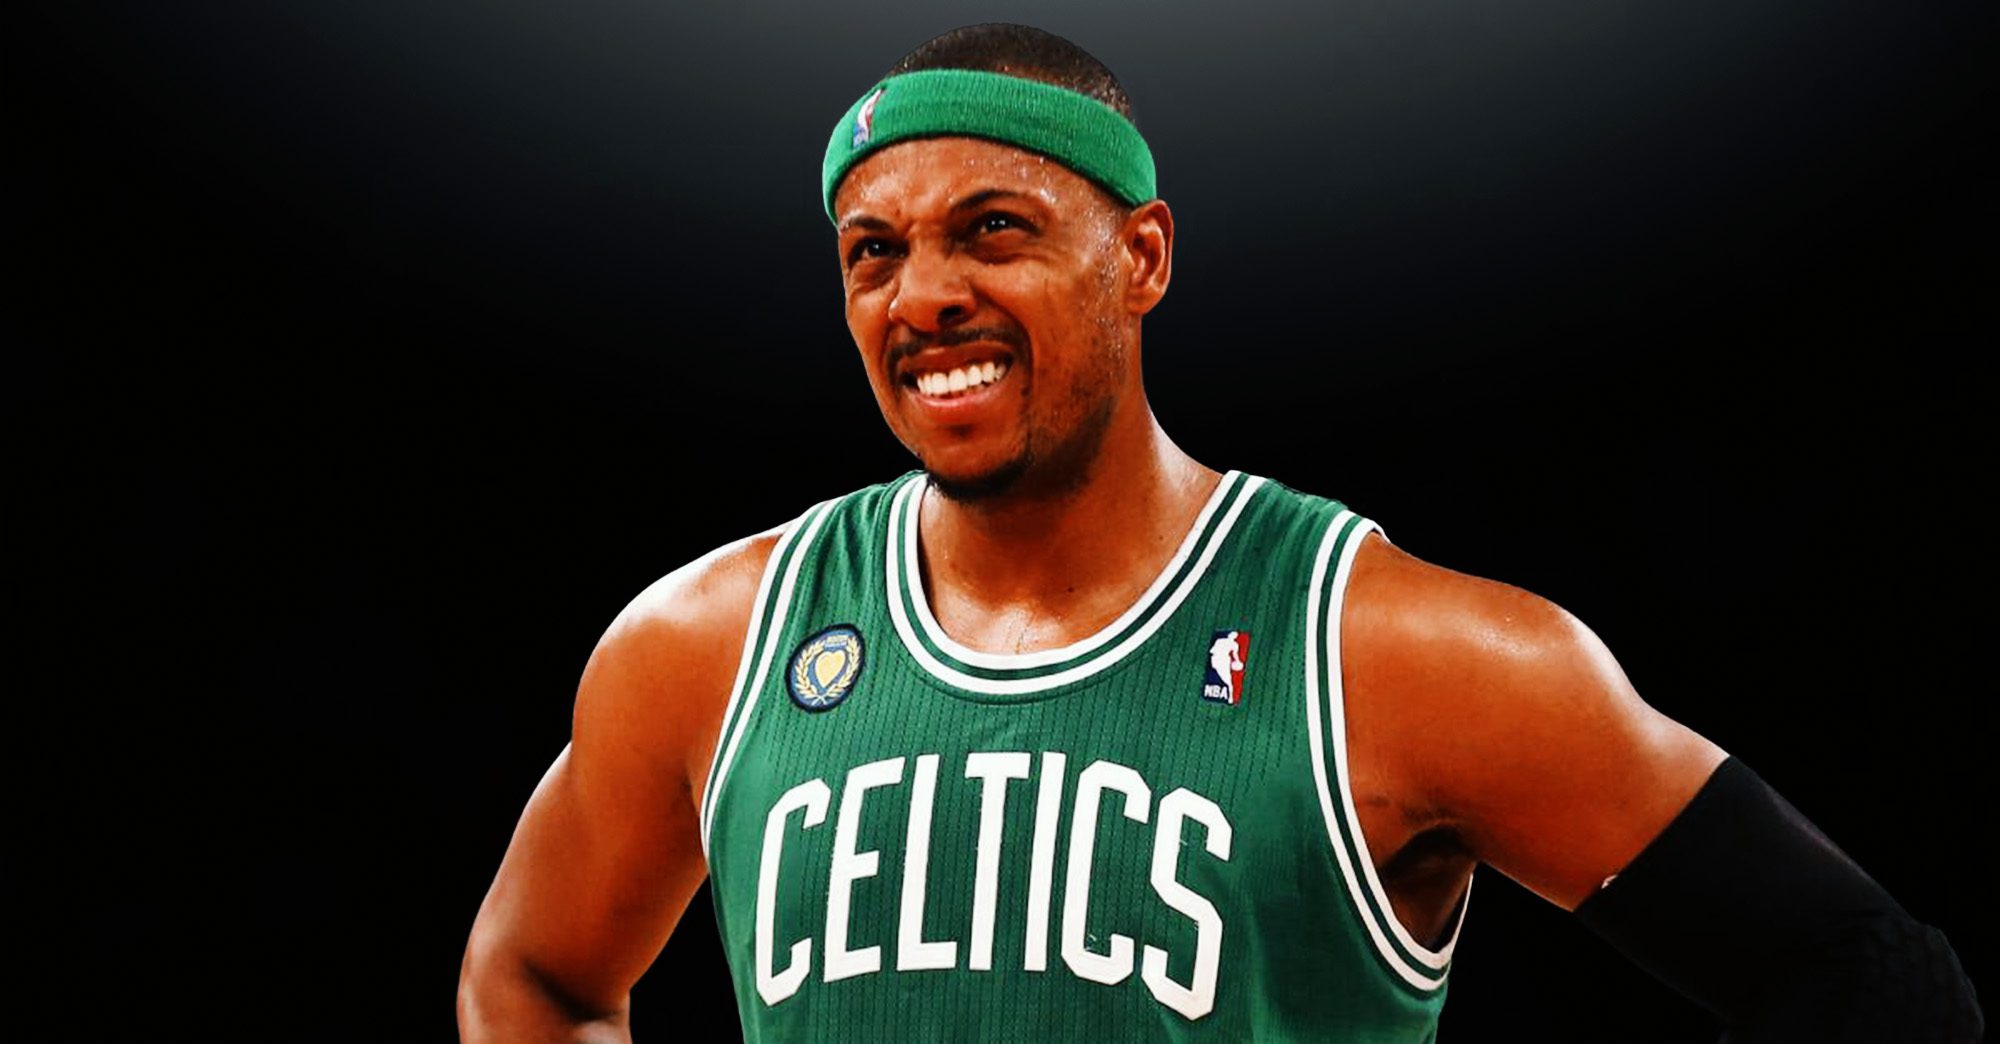 Paul Pierce Explains Why He Didn’t Like Playing on Christmas Day